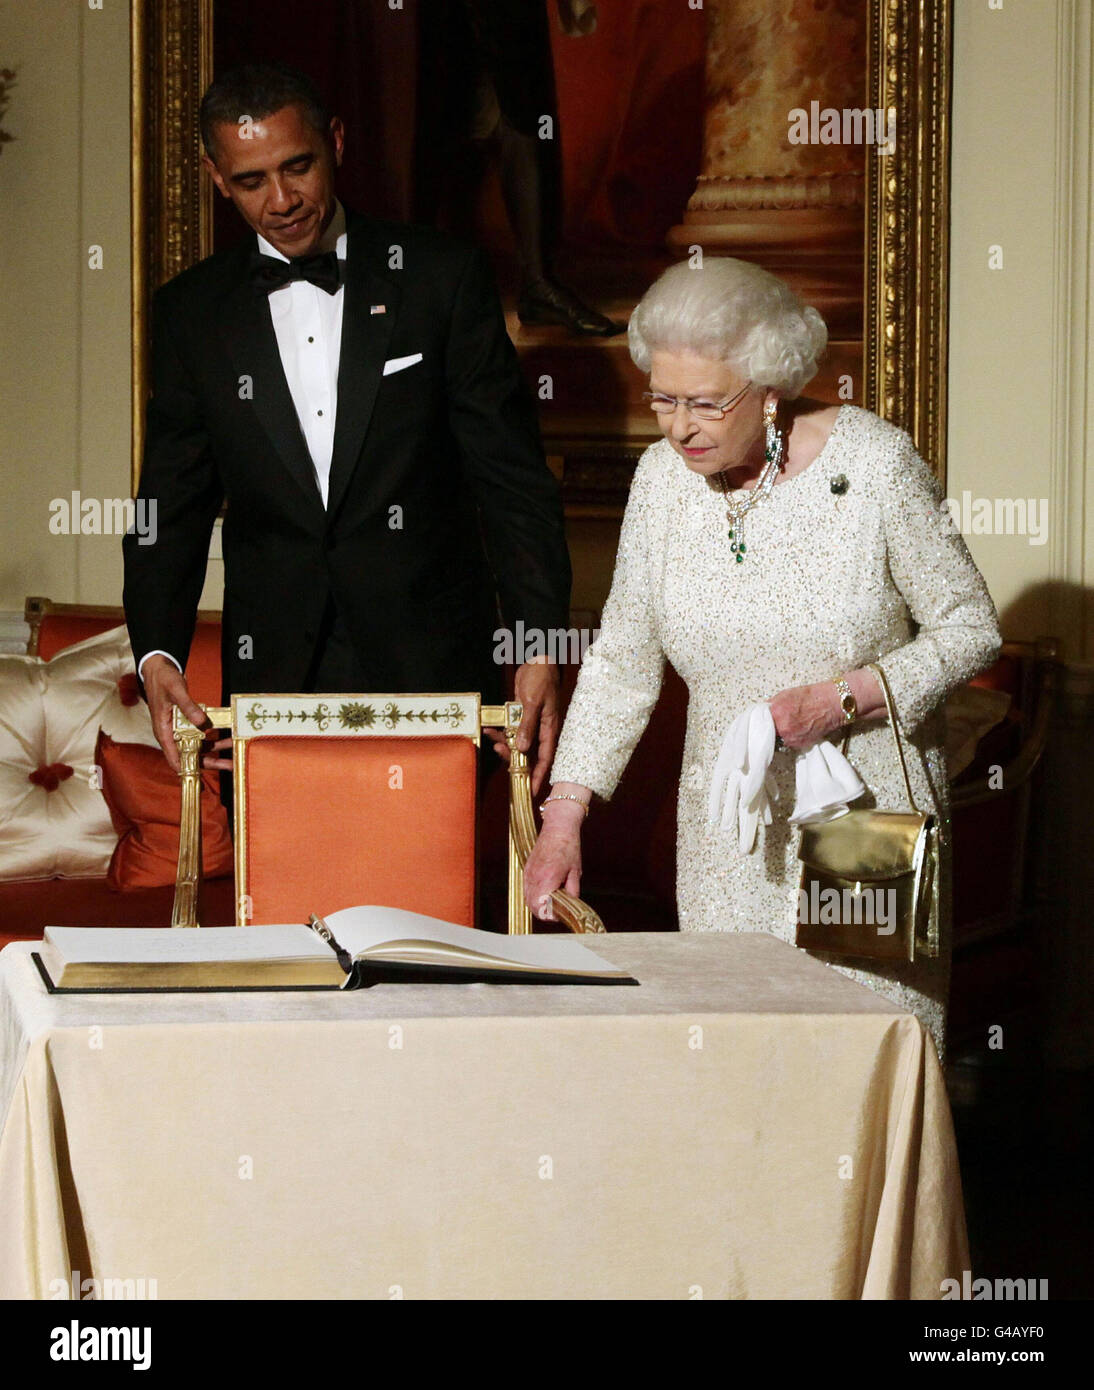 Queen Elizabeth II arrives to sign the guest book as she bids farewell to US President Barack Obama and First Lady Michelle Obama, watch by the Duke of Edinburgh at Winfield House - the residence of the Ambassador of the United States of America - in Regent's Park, London. Stock Photo